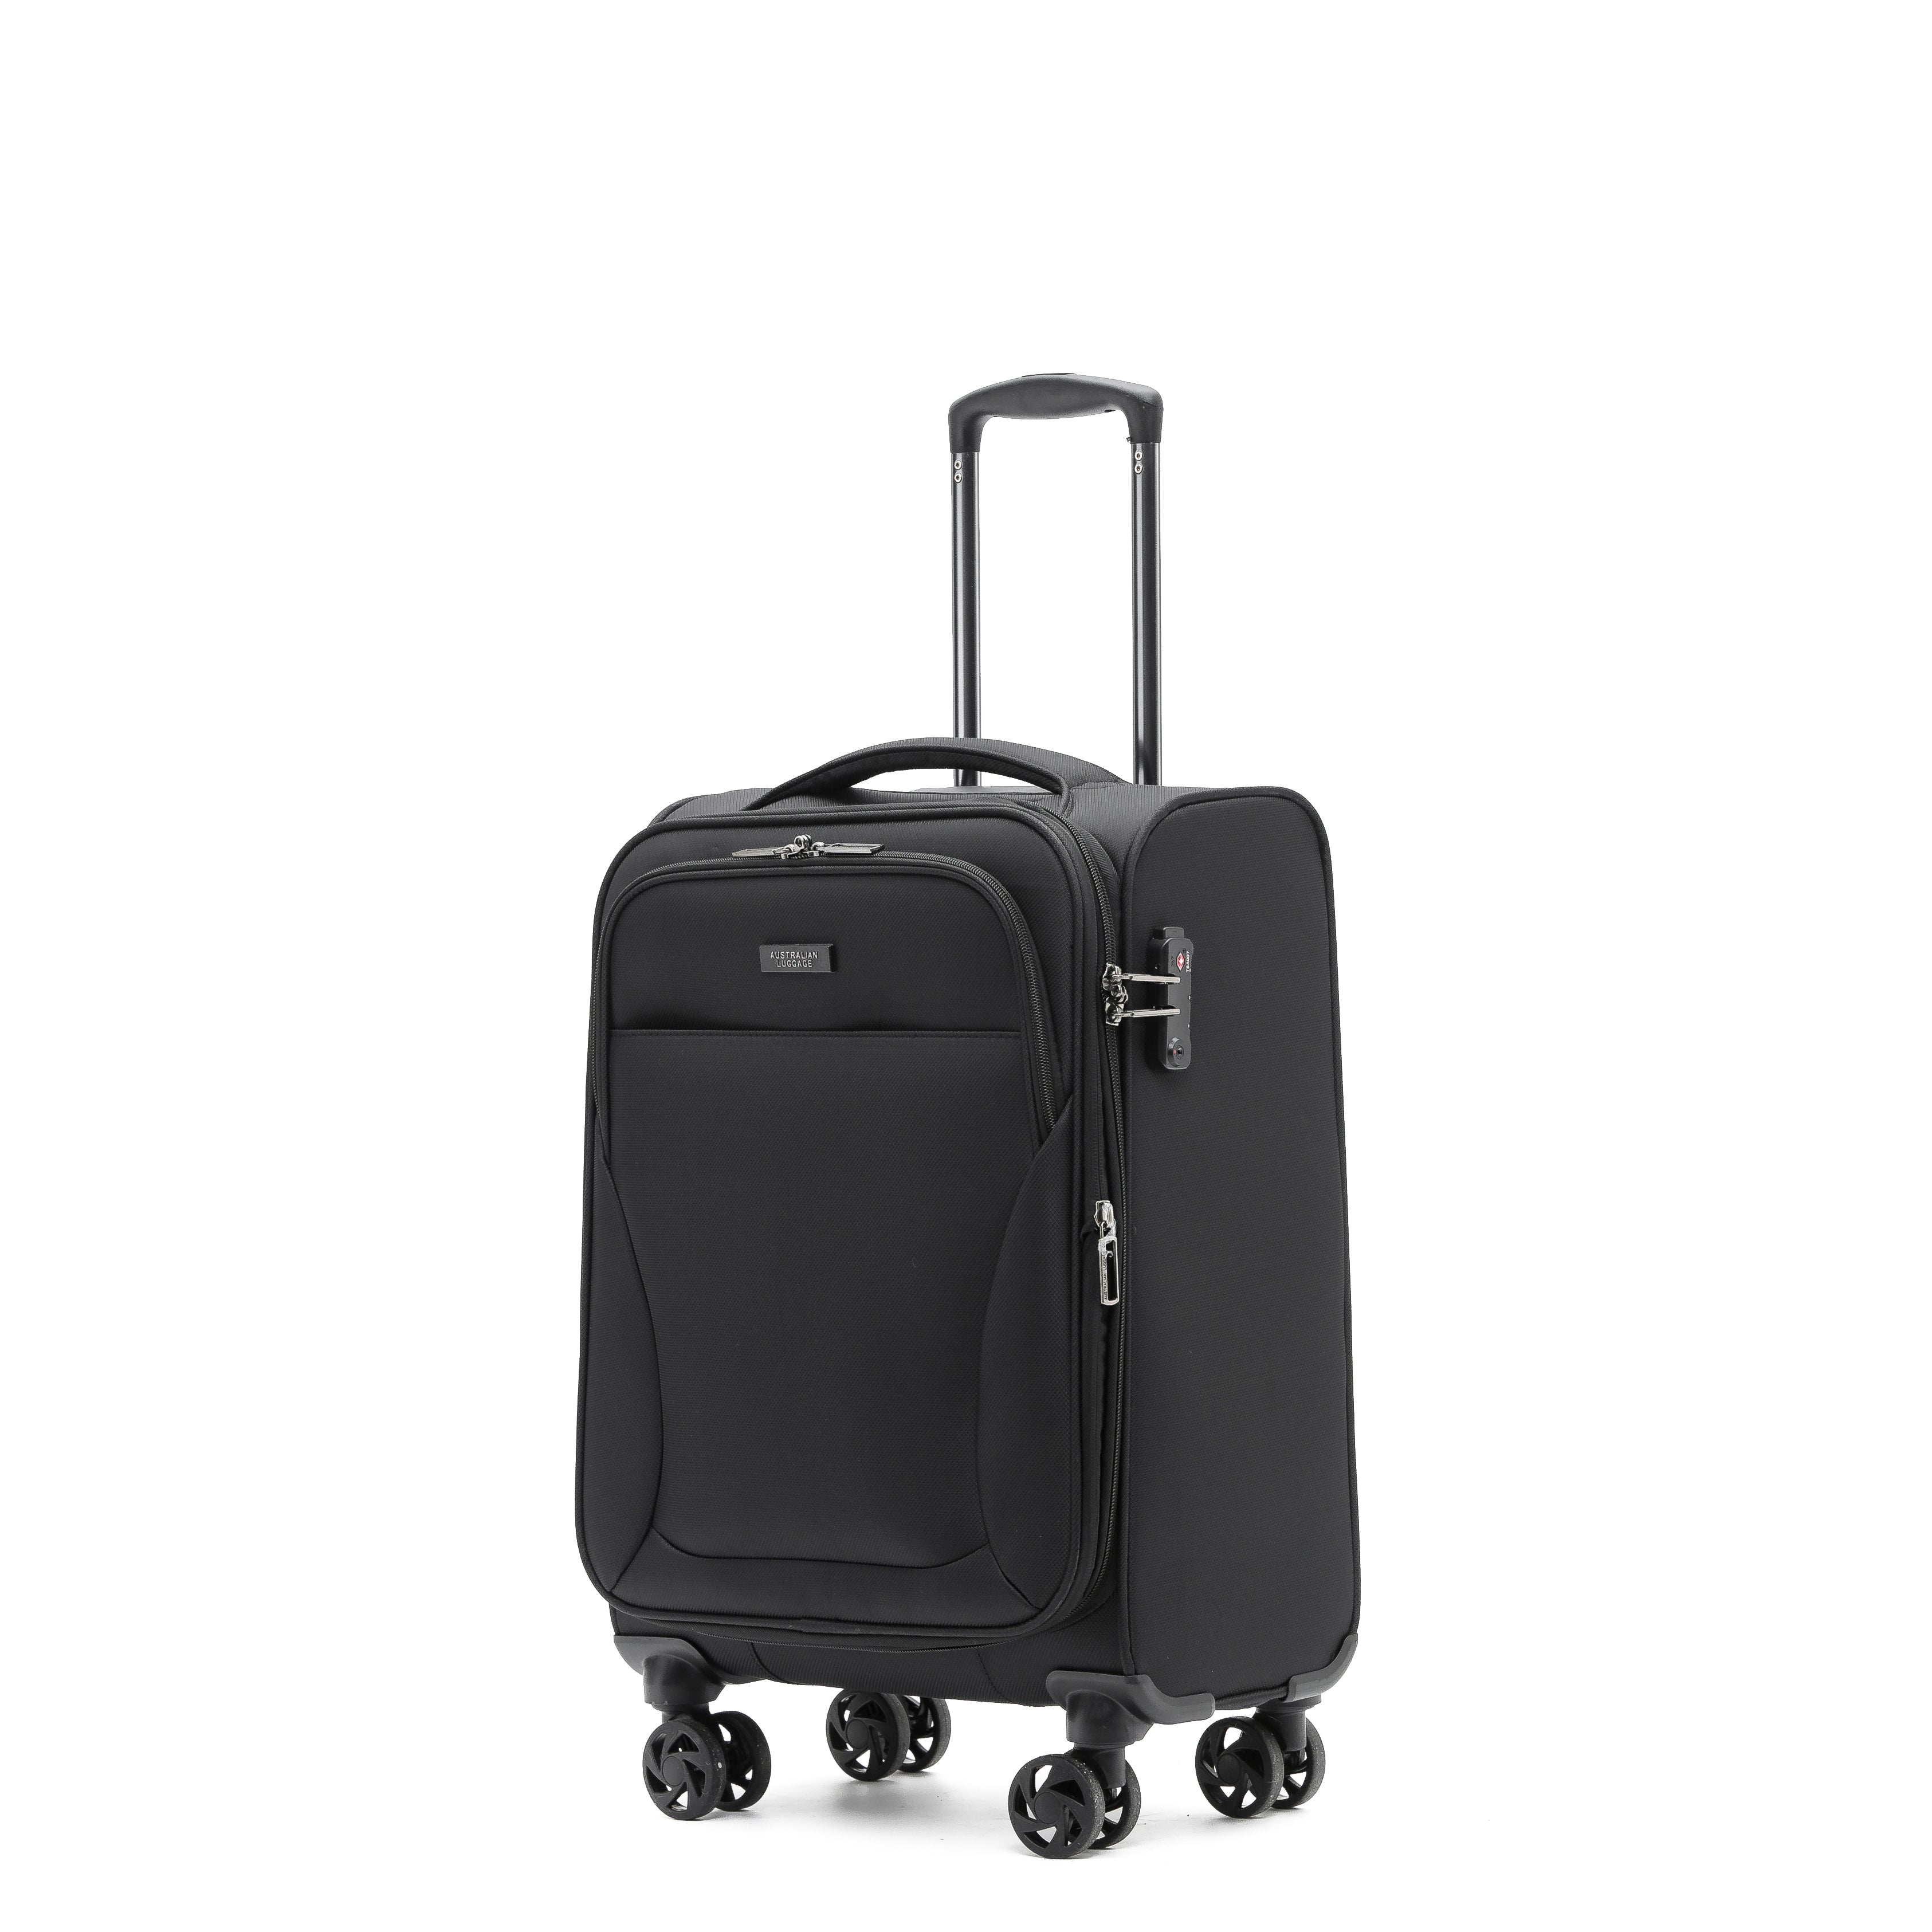 AUS LUGGAGE - WINGS Trolley Case 20in Small - BLACK-2